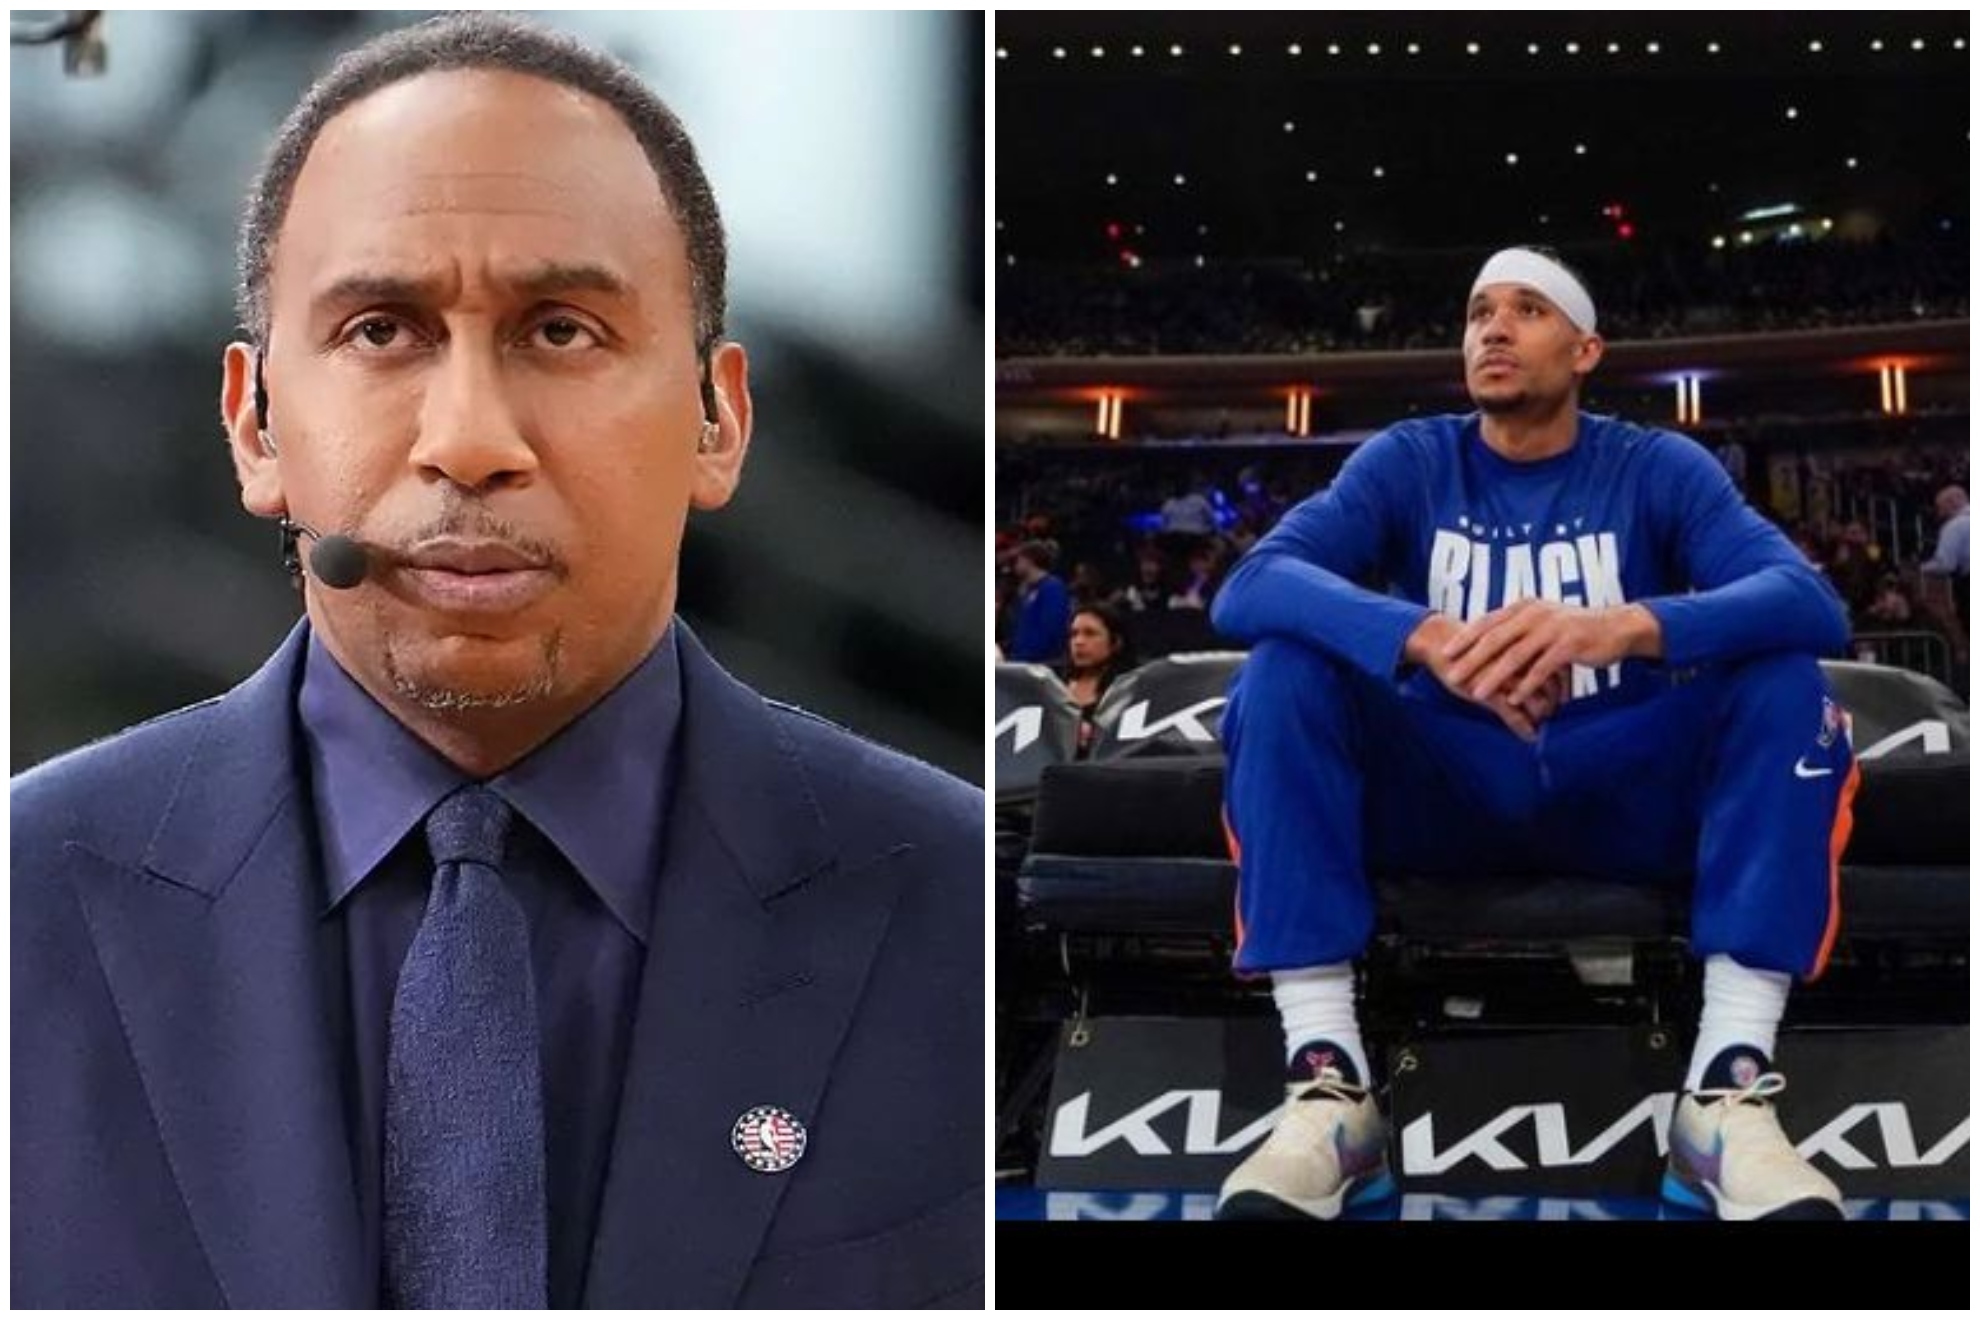 Stephen A Smith: Josh Hart is weird for wanting to try breast milk, what the hell!